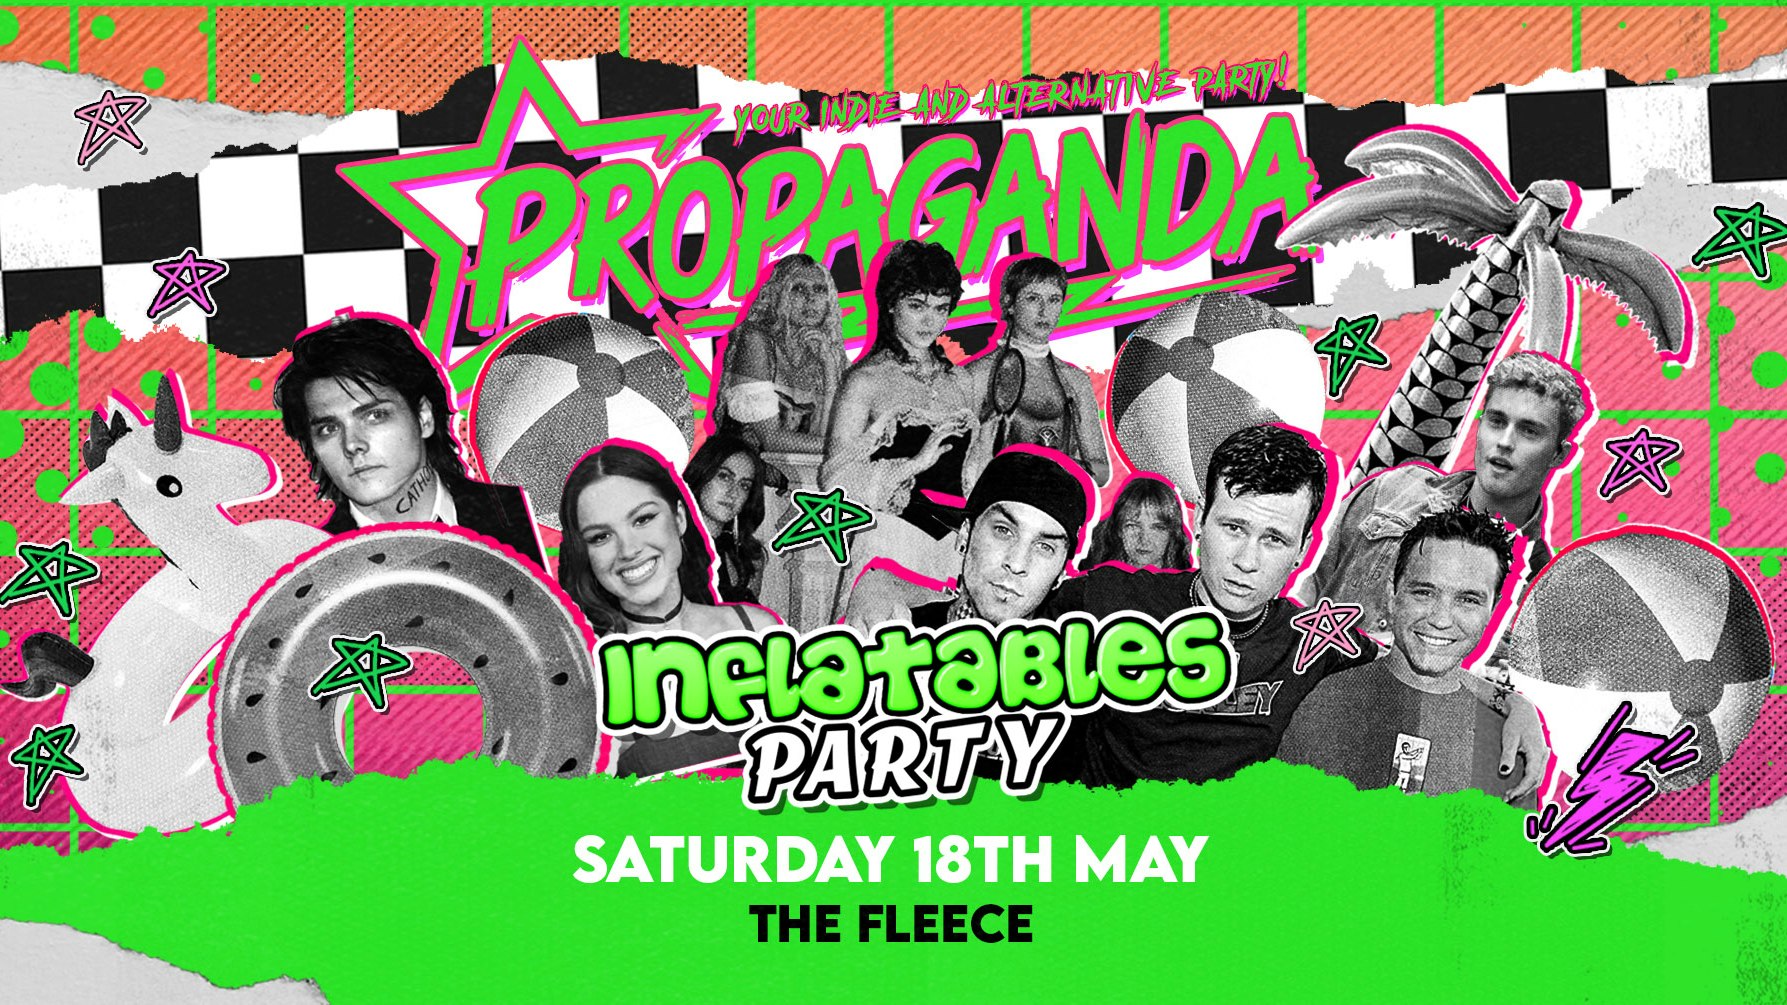 Inflatables Party! – Propaganda Bristol – Your Indie & Alternative Party!